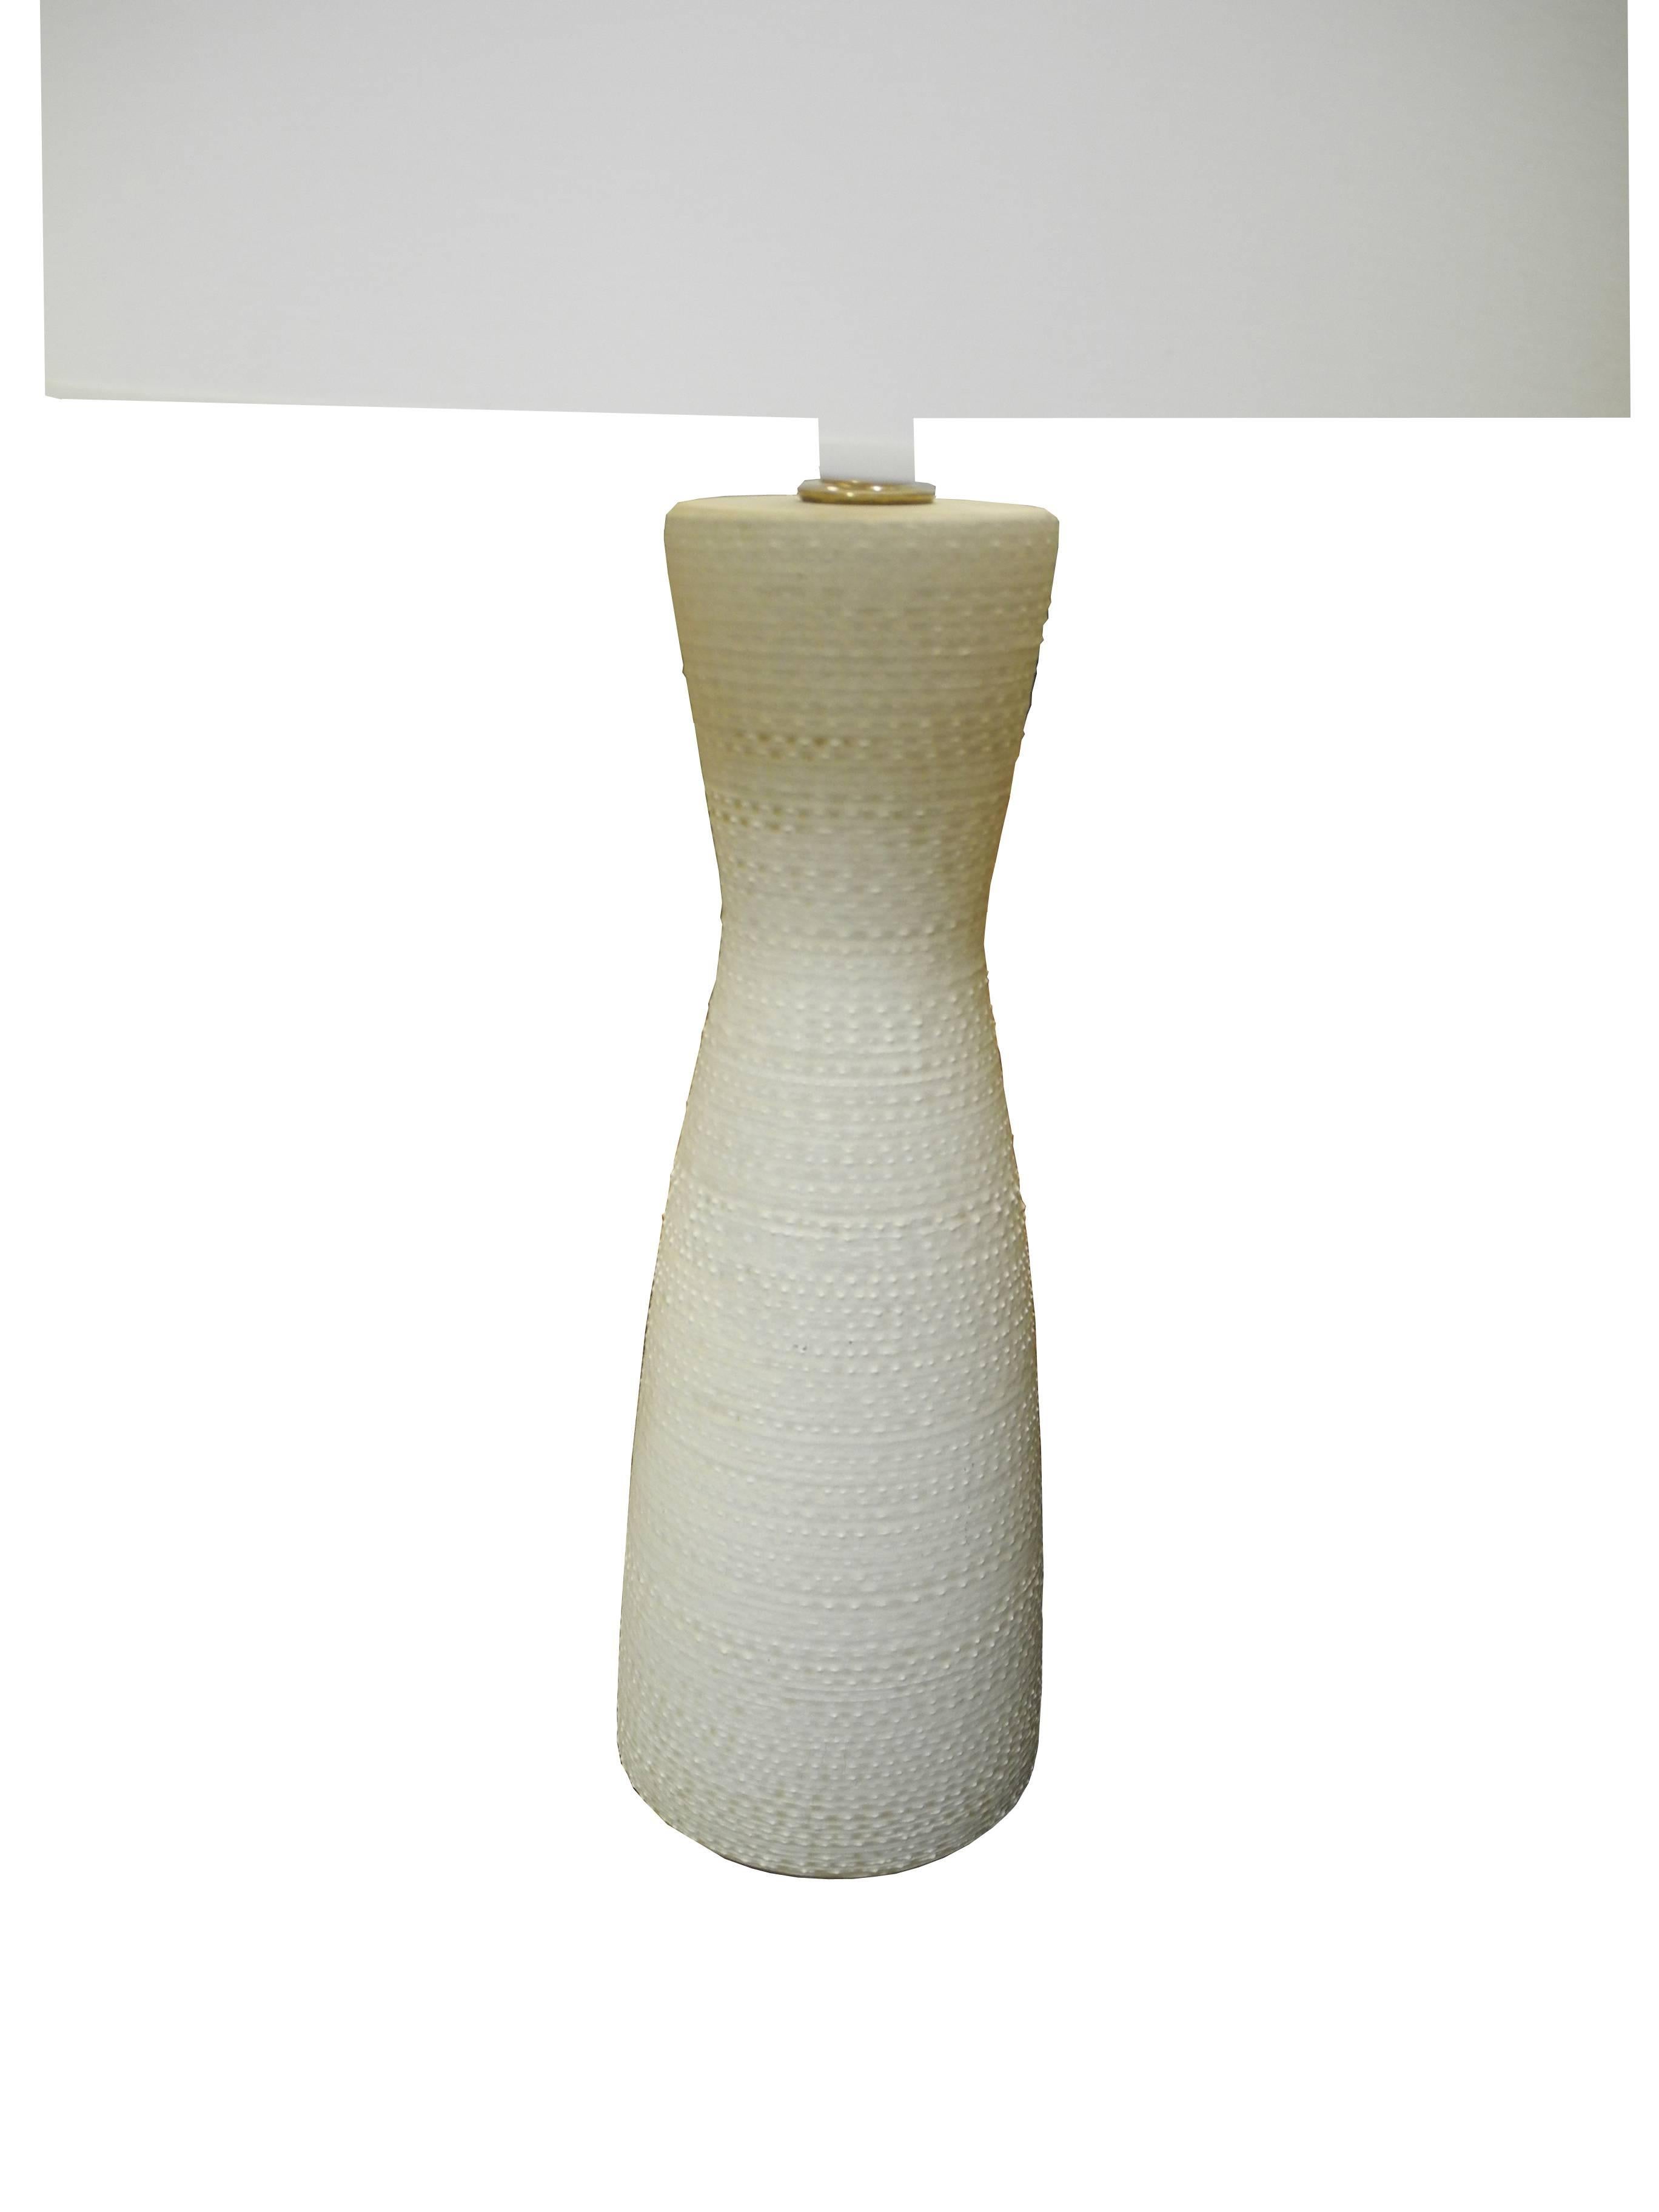 This Mid-Century Modern design technics ceramic lamp was made in New York in the 1950s. The color is off-white and the ceramic and glaze is textured. Measure: The top of the ceramic is 18 inches.
 